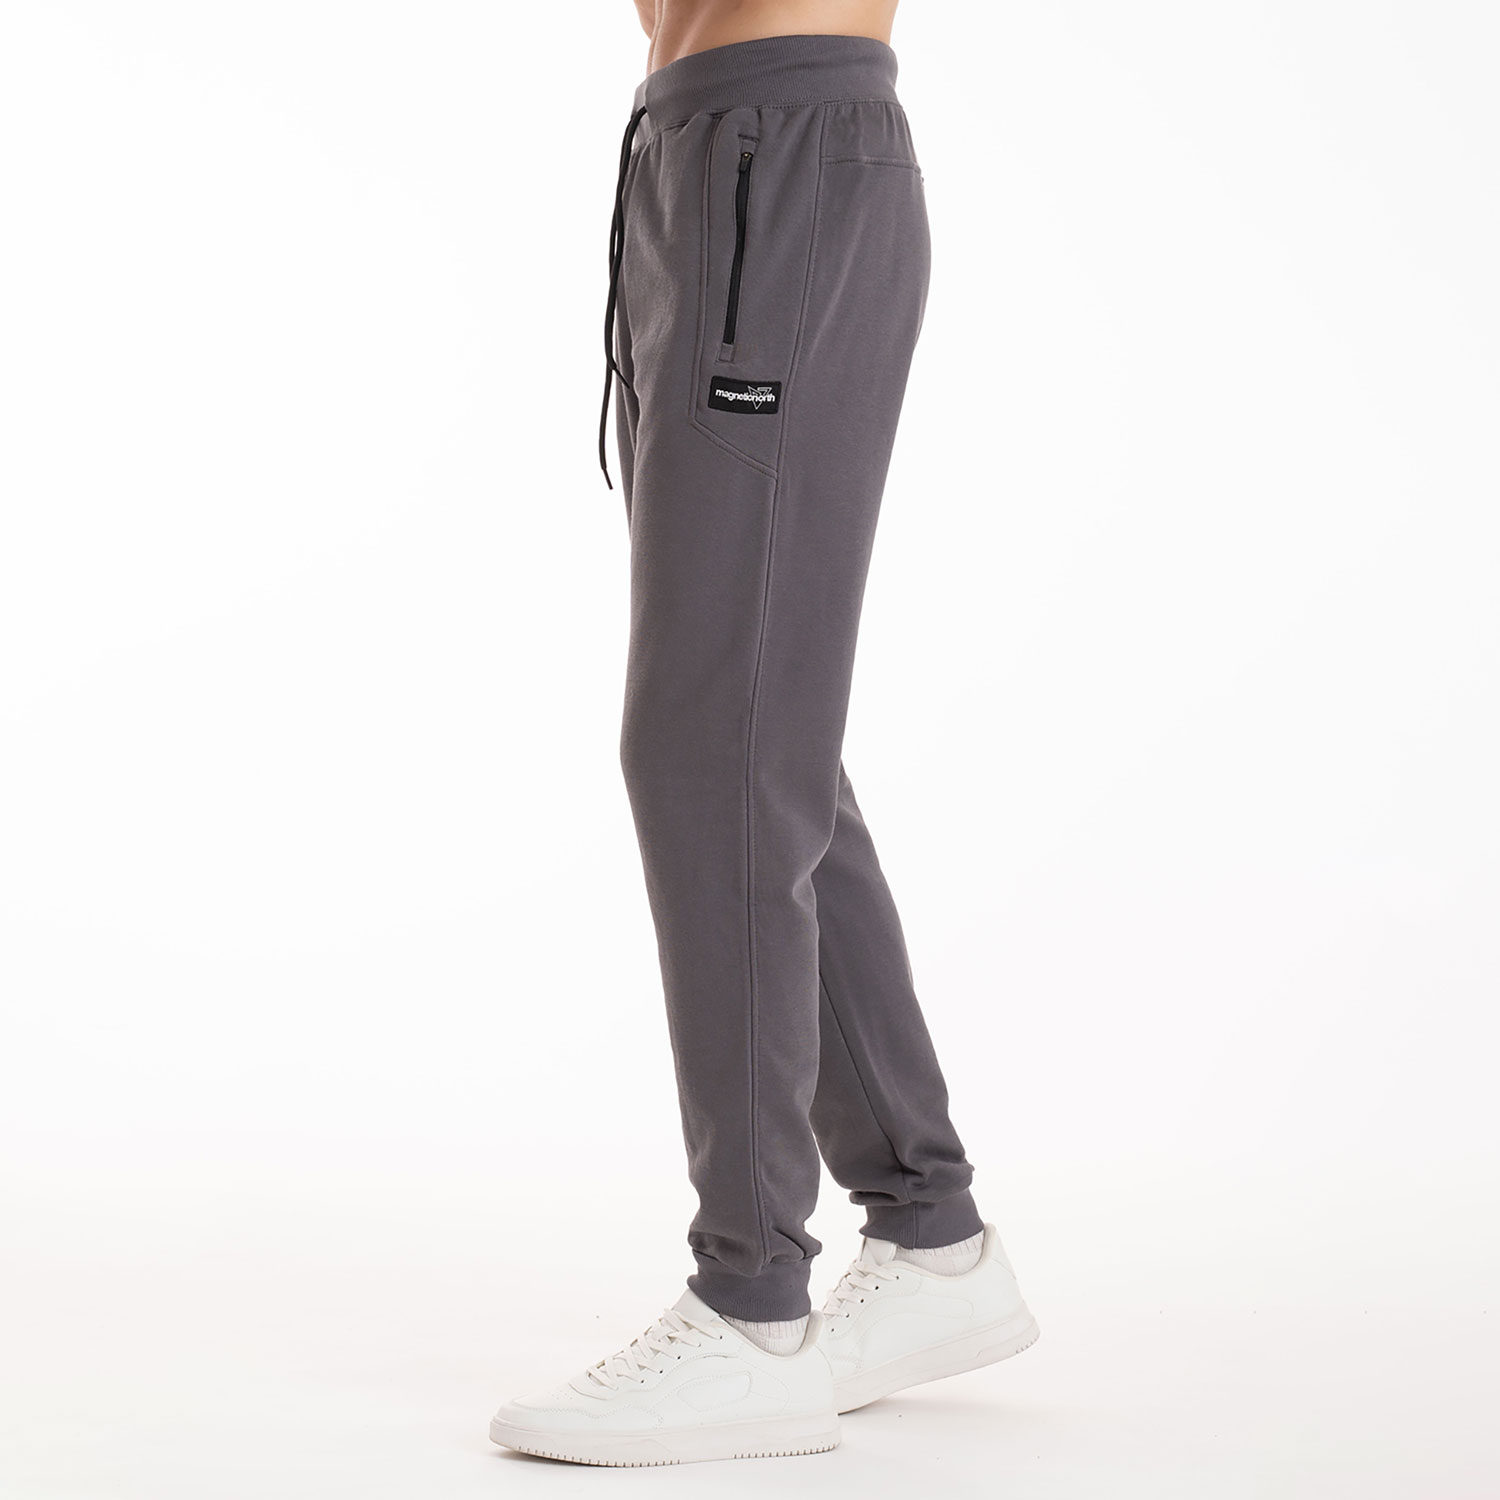 MAGNETIC NORTH MEN'S ATHLETIC BOOST PANTS ΓΚΡΙ